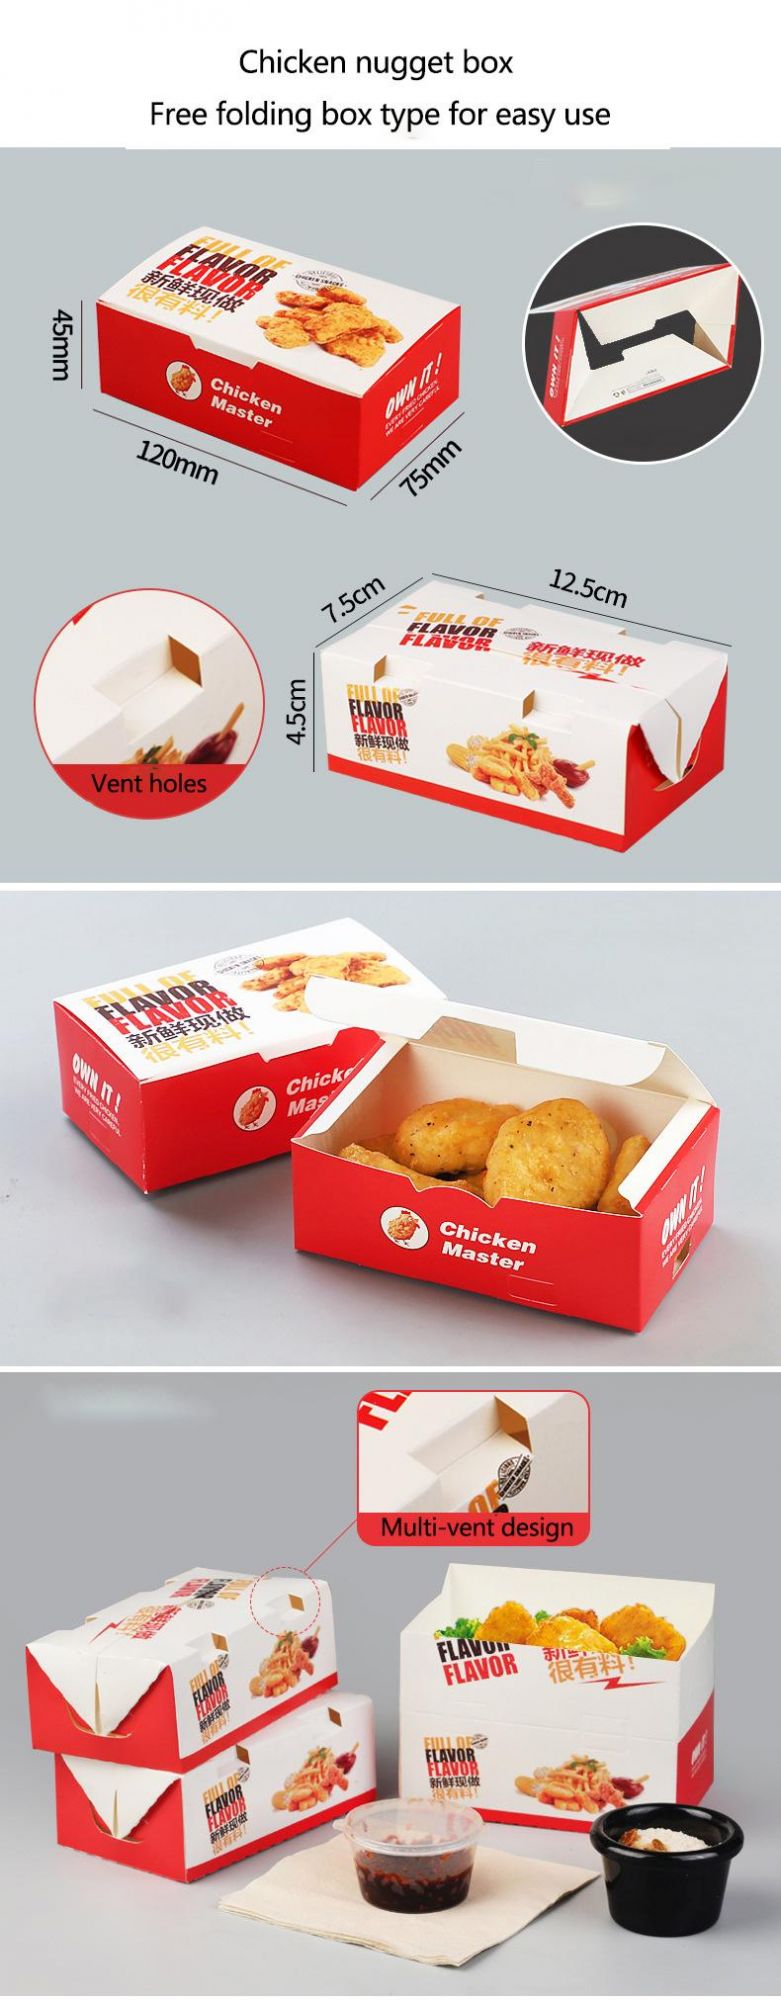 Take Away out Snack Box Biogradable Food Packaging Kraft with Logo Printing Food Level Laminating Paper Meal Packaging